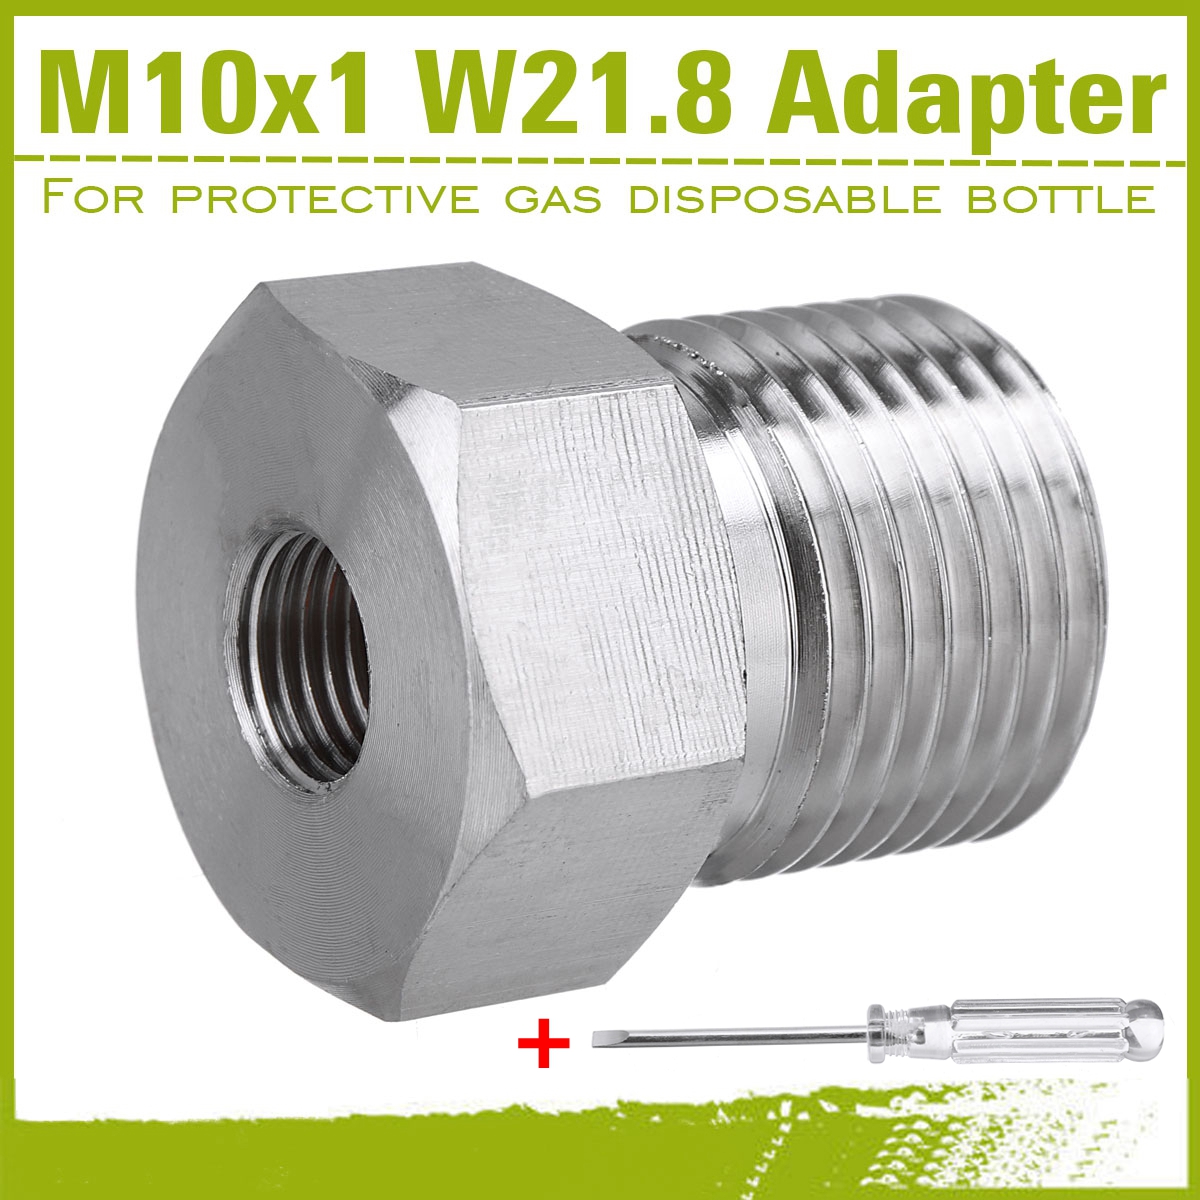 CO2-Adapter-For-Pressure-Reducer-From-Reusable-To-Disposable-Bottle-M10x1-Inert-Gas-1617890-1